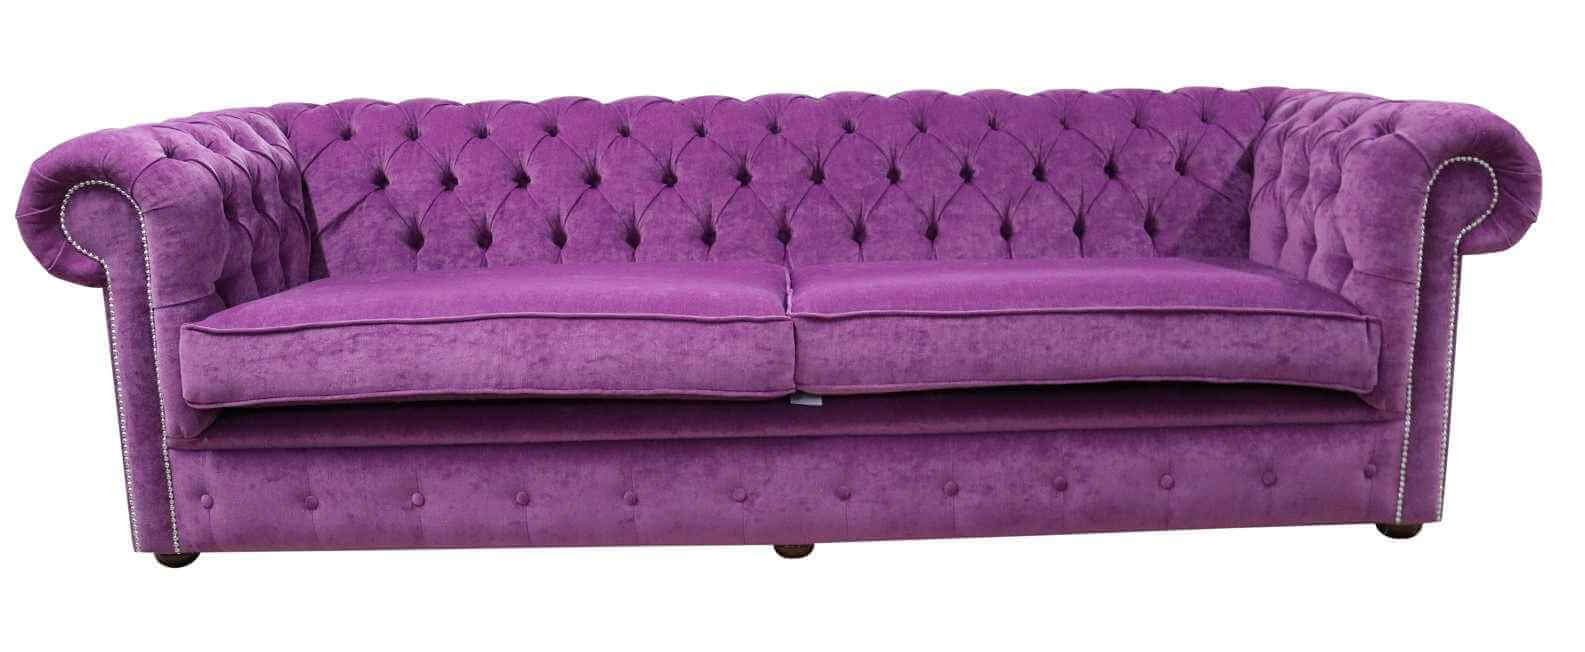 Alfresco Elegance Choosing a Chesterfield Sofa for Outdoor Living  %Post Title